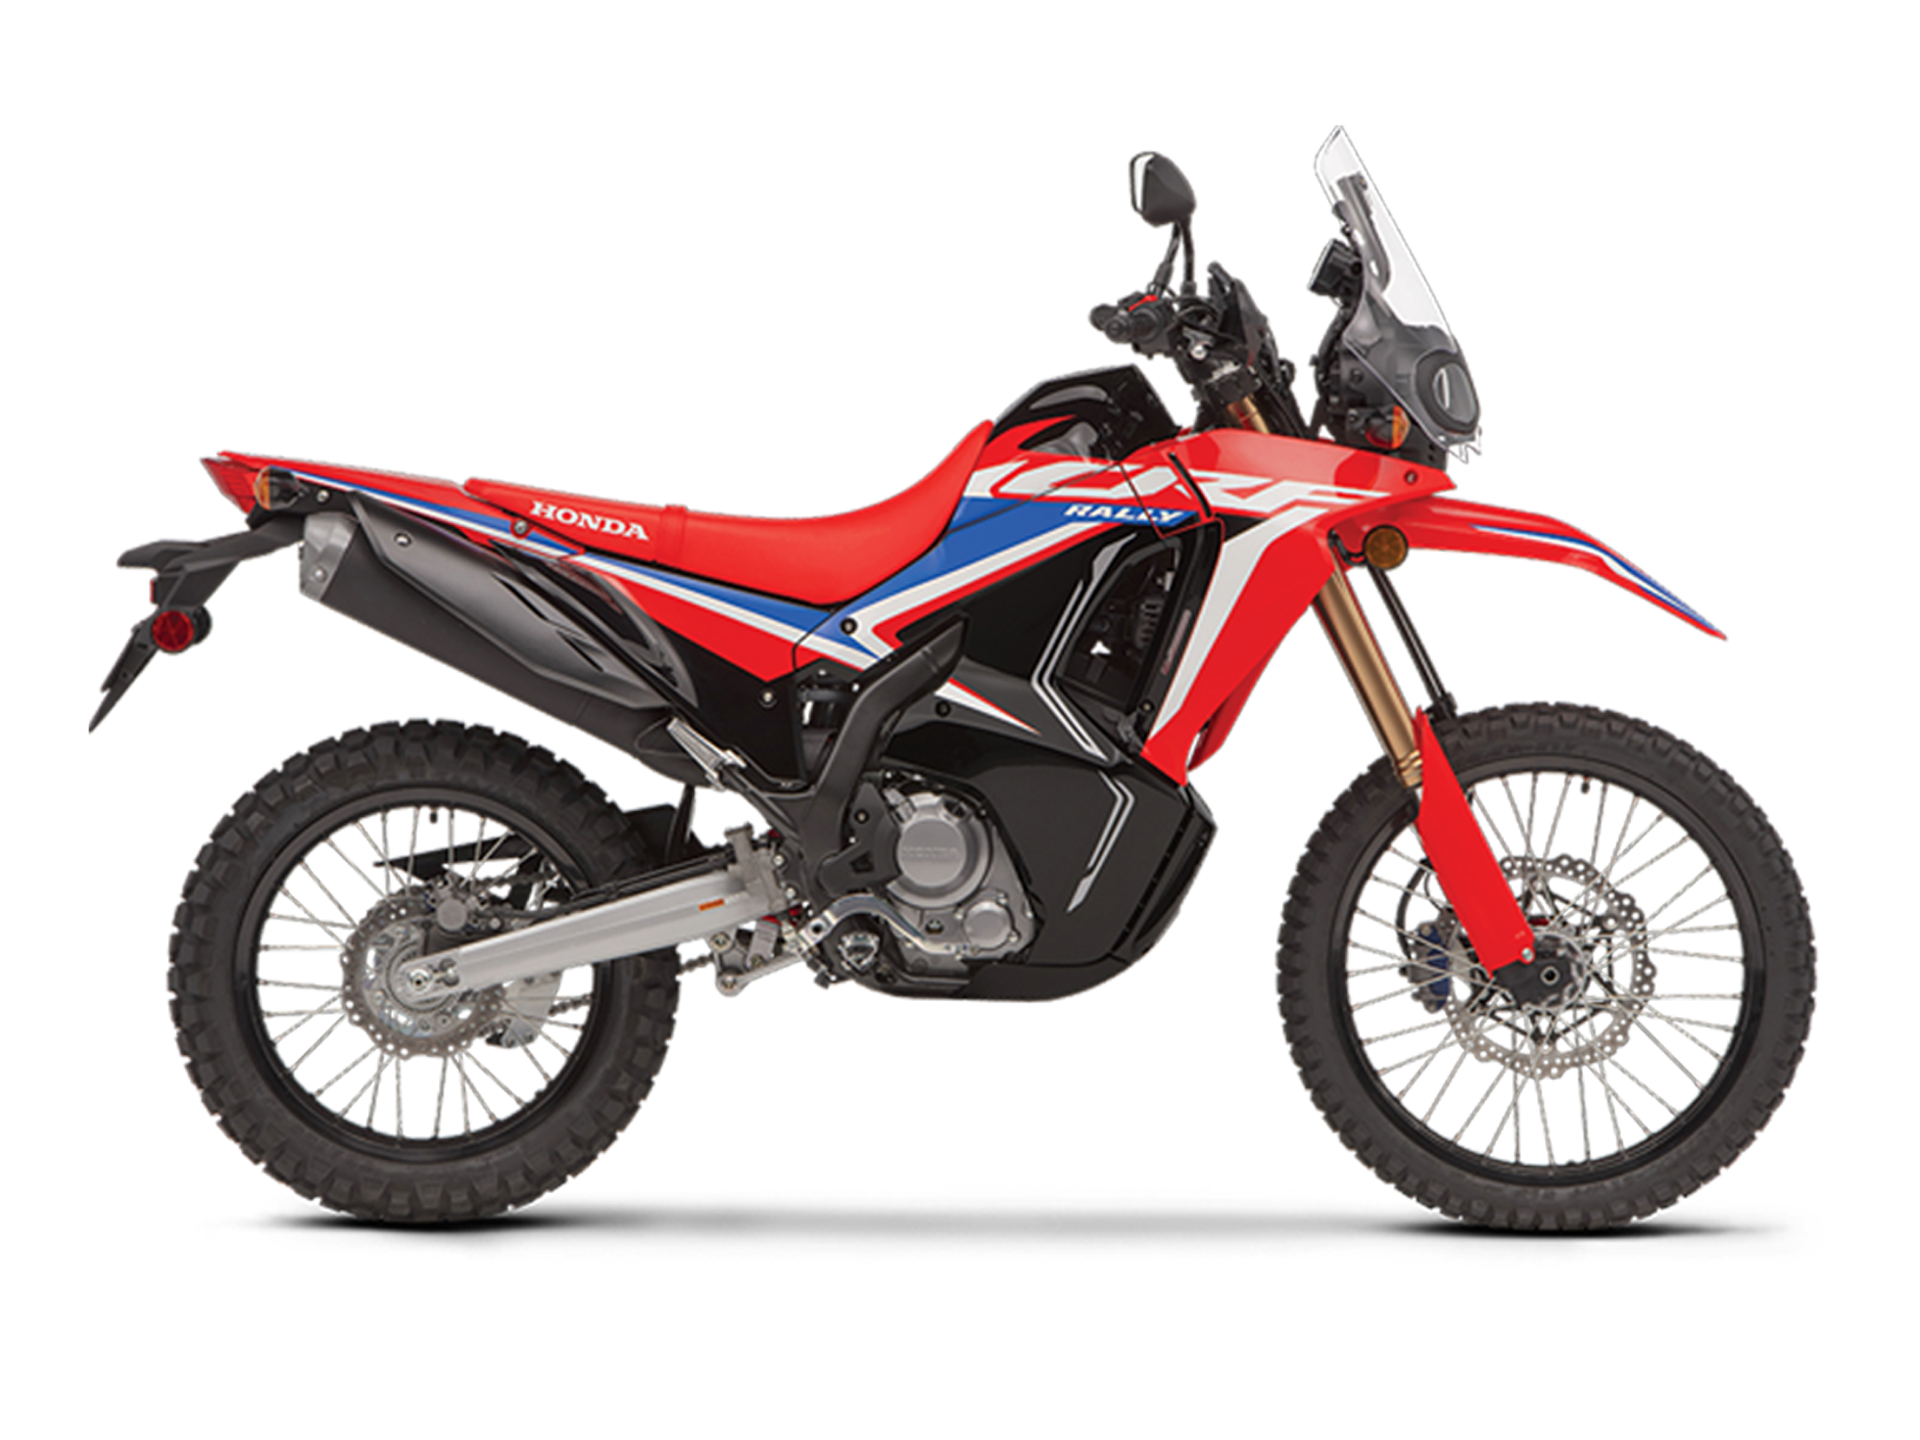 CRF300L Rally > The Dirtbike for Thrill Seekers